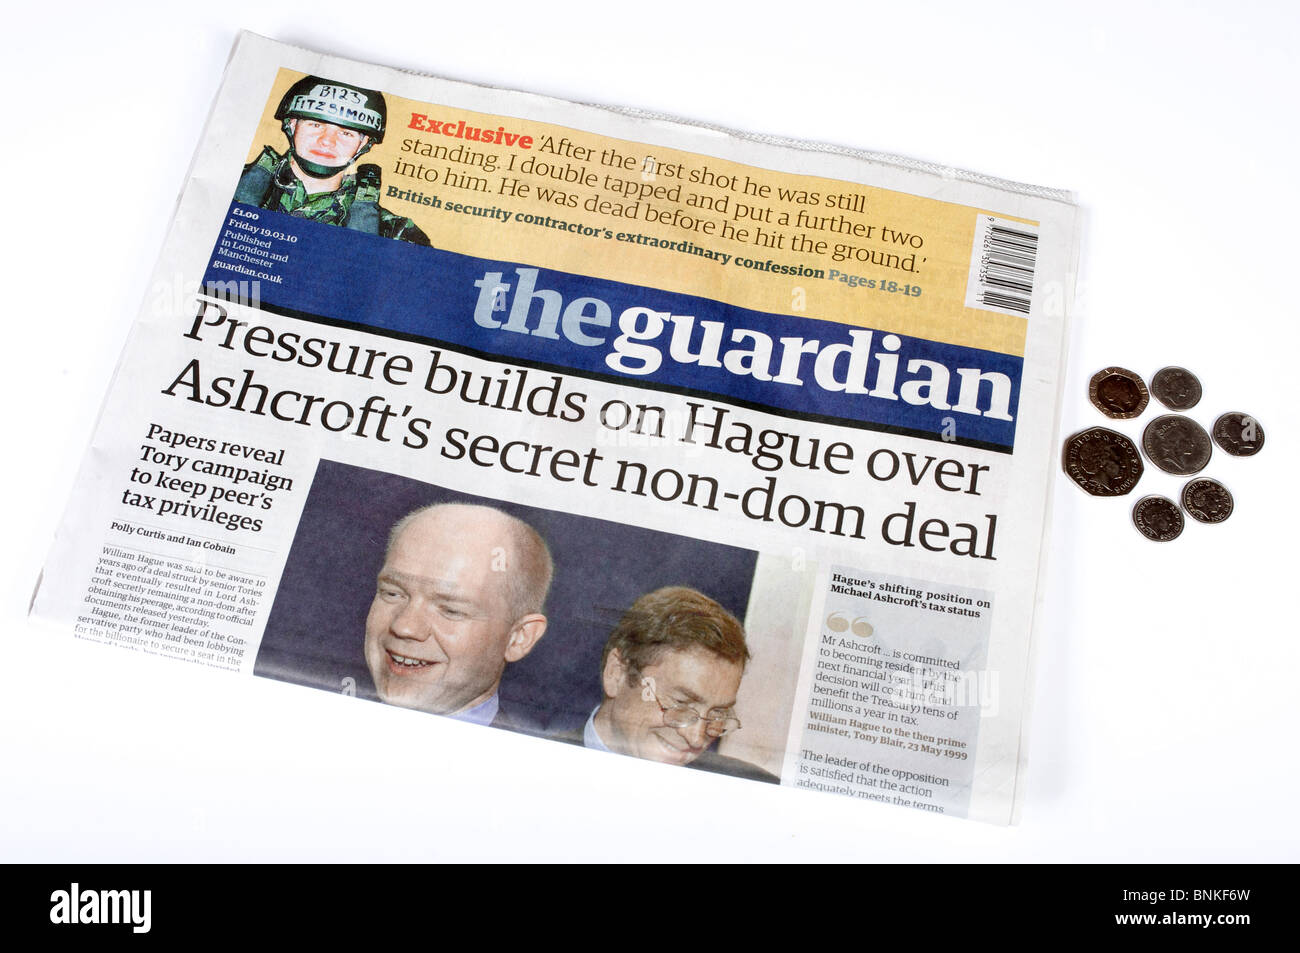 Copy of The Guardian newspaper with the cover price of one pound shown in coins Stock Photo